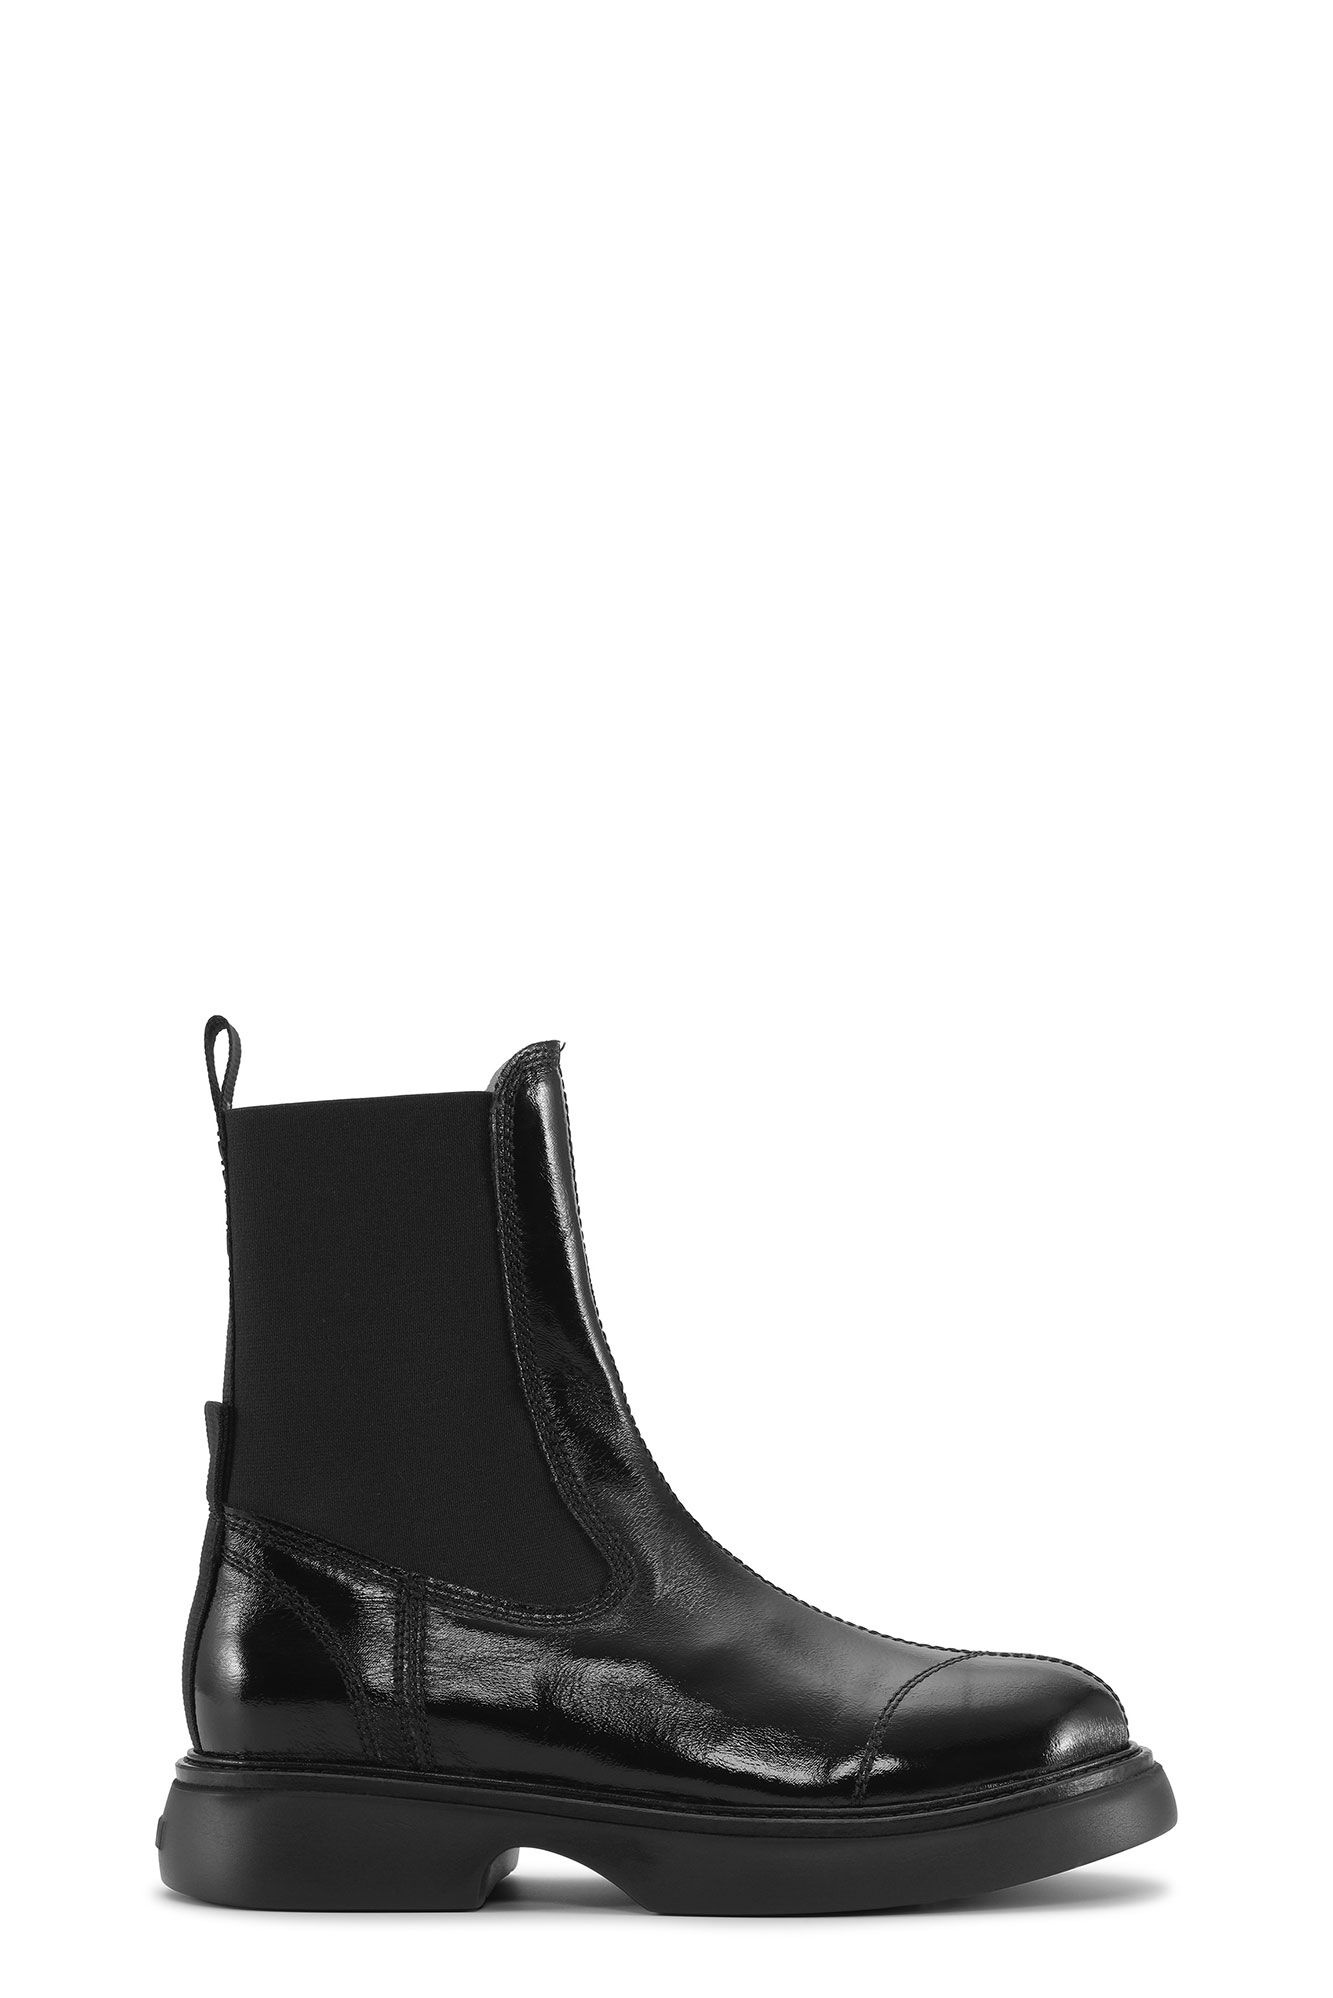 BLACK EVERYDAY MID CHELSEA BOOTS - 1